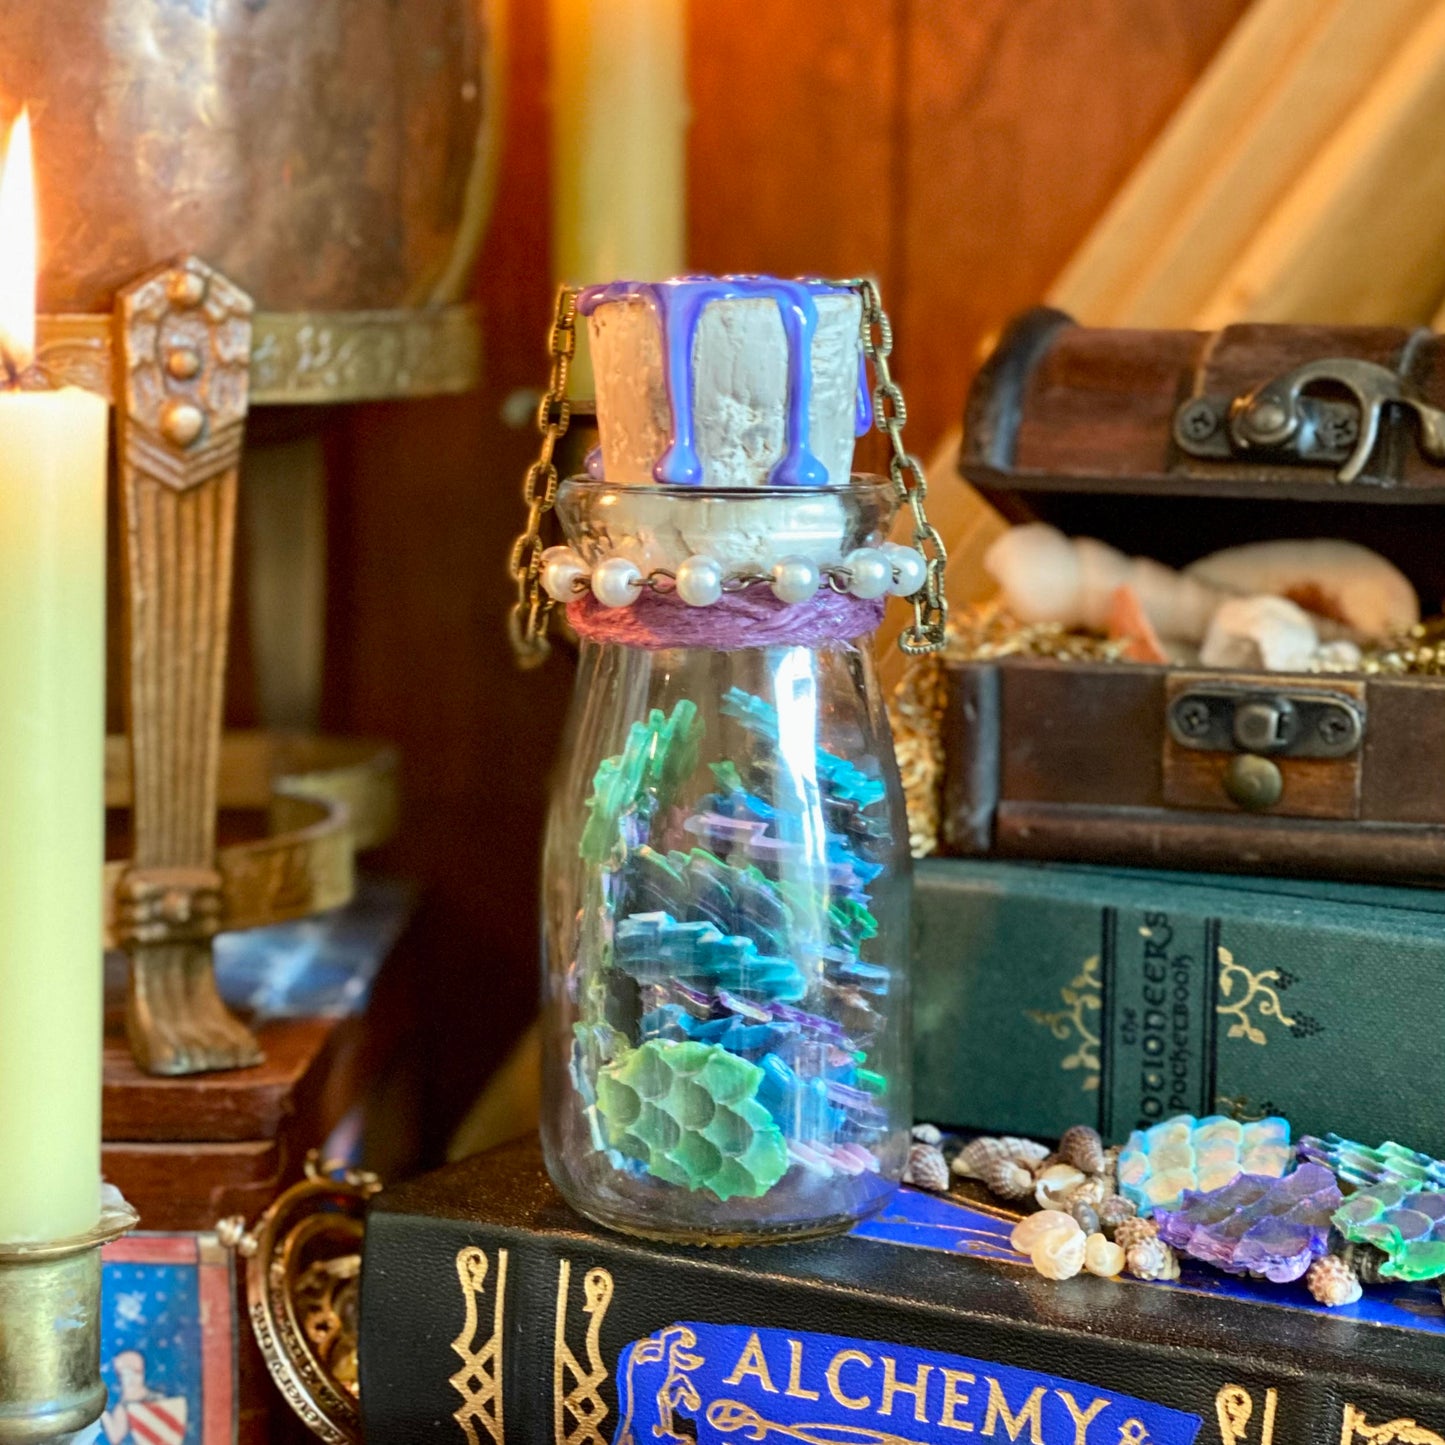 Scales of The Merfolk, A Decorative Apothecary Jar